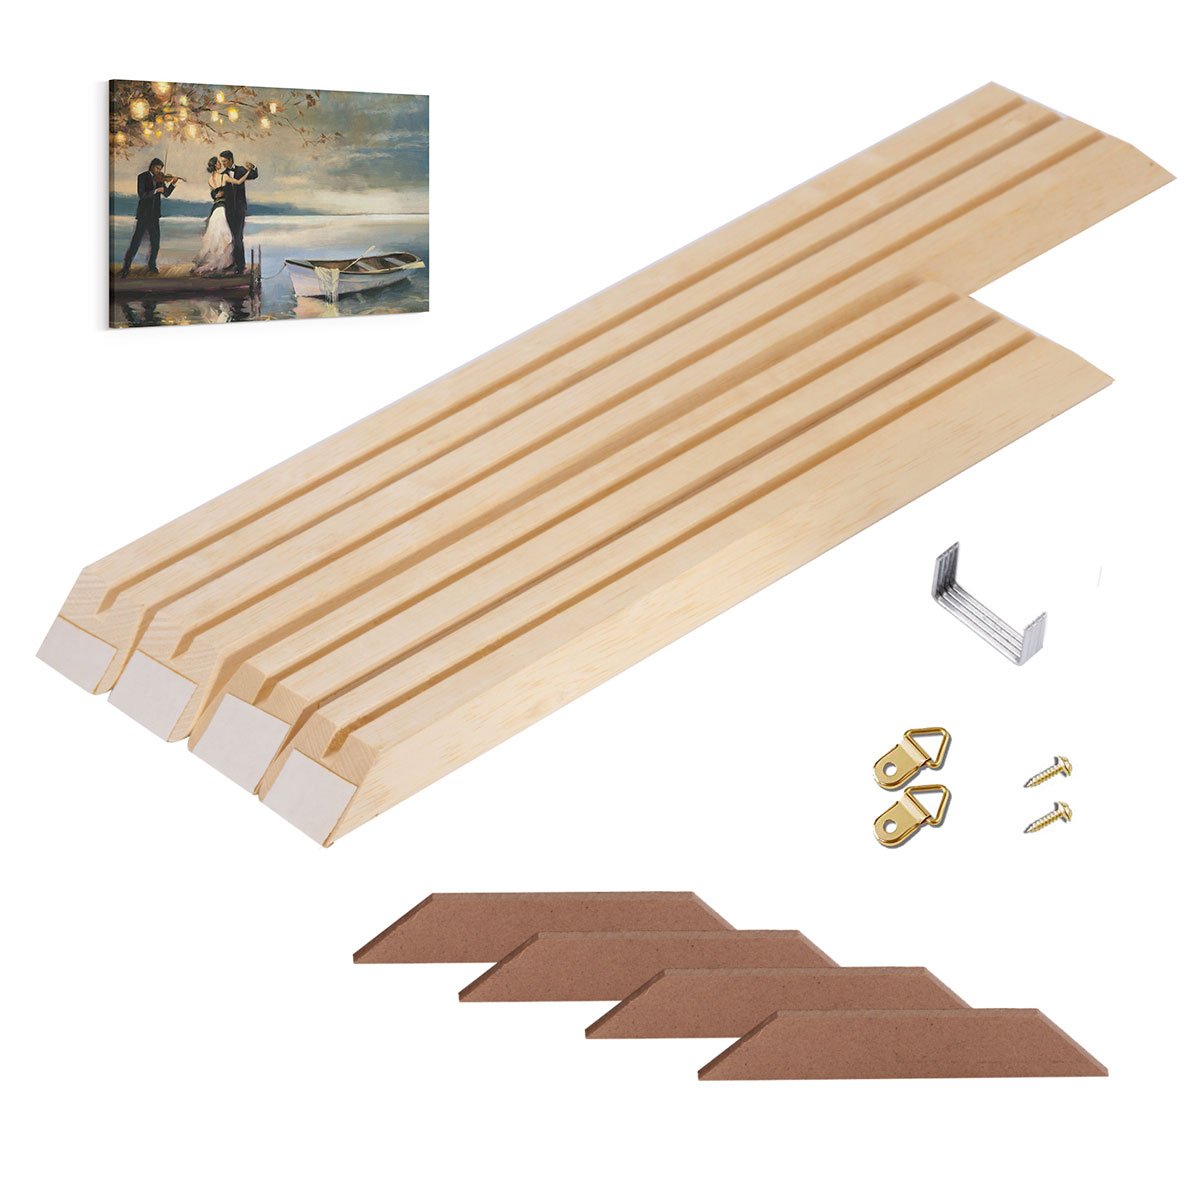 DIY Wooden Bar Frame Kit For Canvas Painting Art Stretcher Strip Gallery Wrap C 